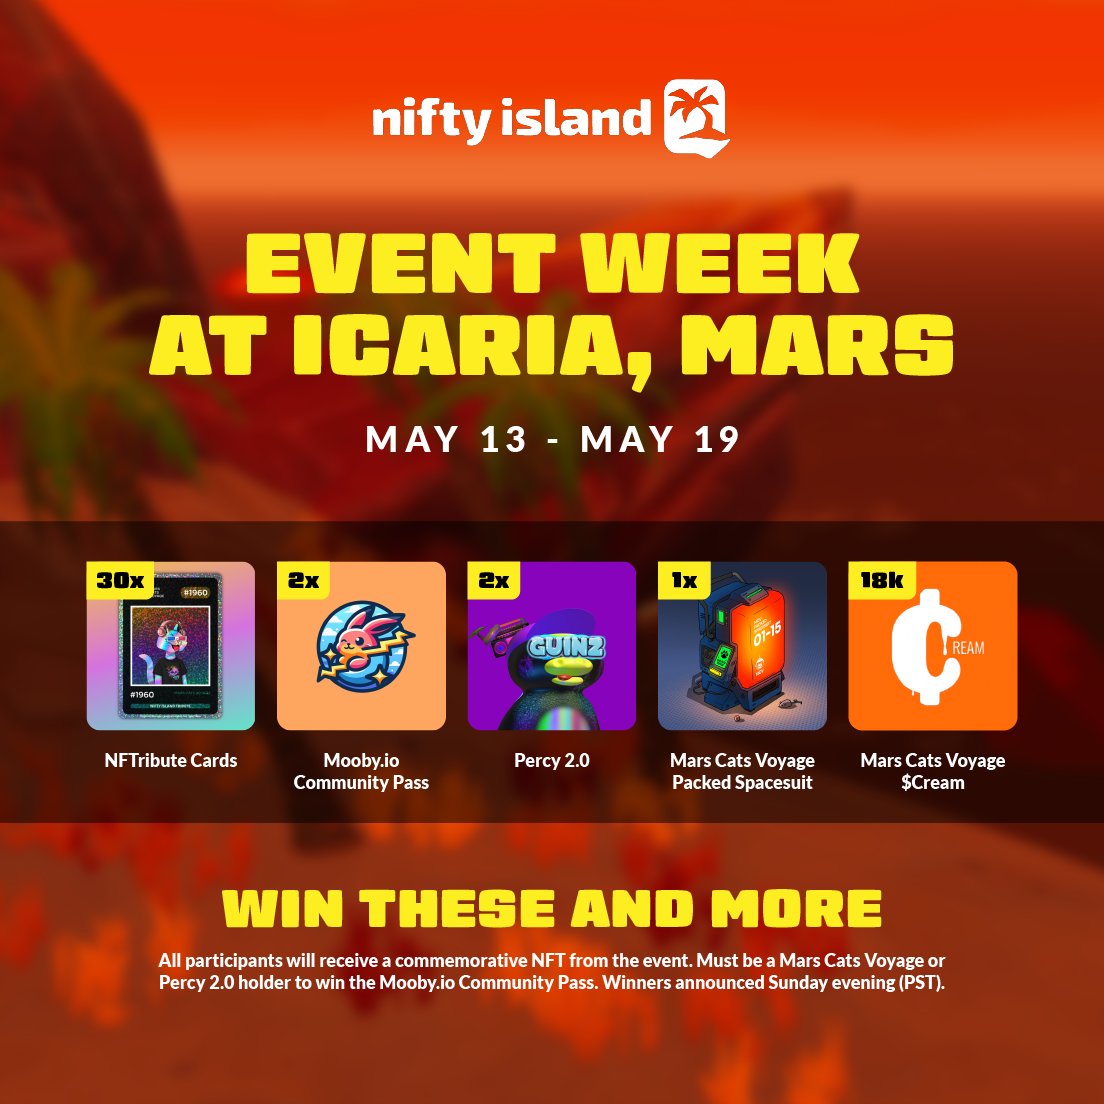 IT'S EVENT WEEK AT ICARIA, MARS!! Big prizes will be raffled off at the end of the week and others will be airdropped while playing. 3,000 $CREAM available to win each day! EARN RAFFLE ENTRIES BY: ⚔️ Playing games on Icaria, Mars ⚔️ 🎯 Setting times on leaderboards 🎯 📸…